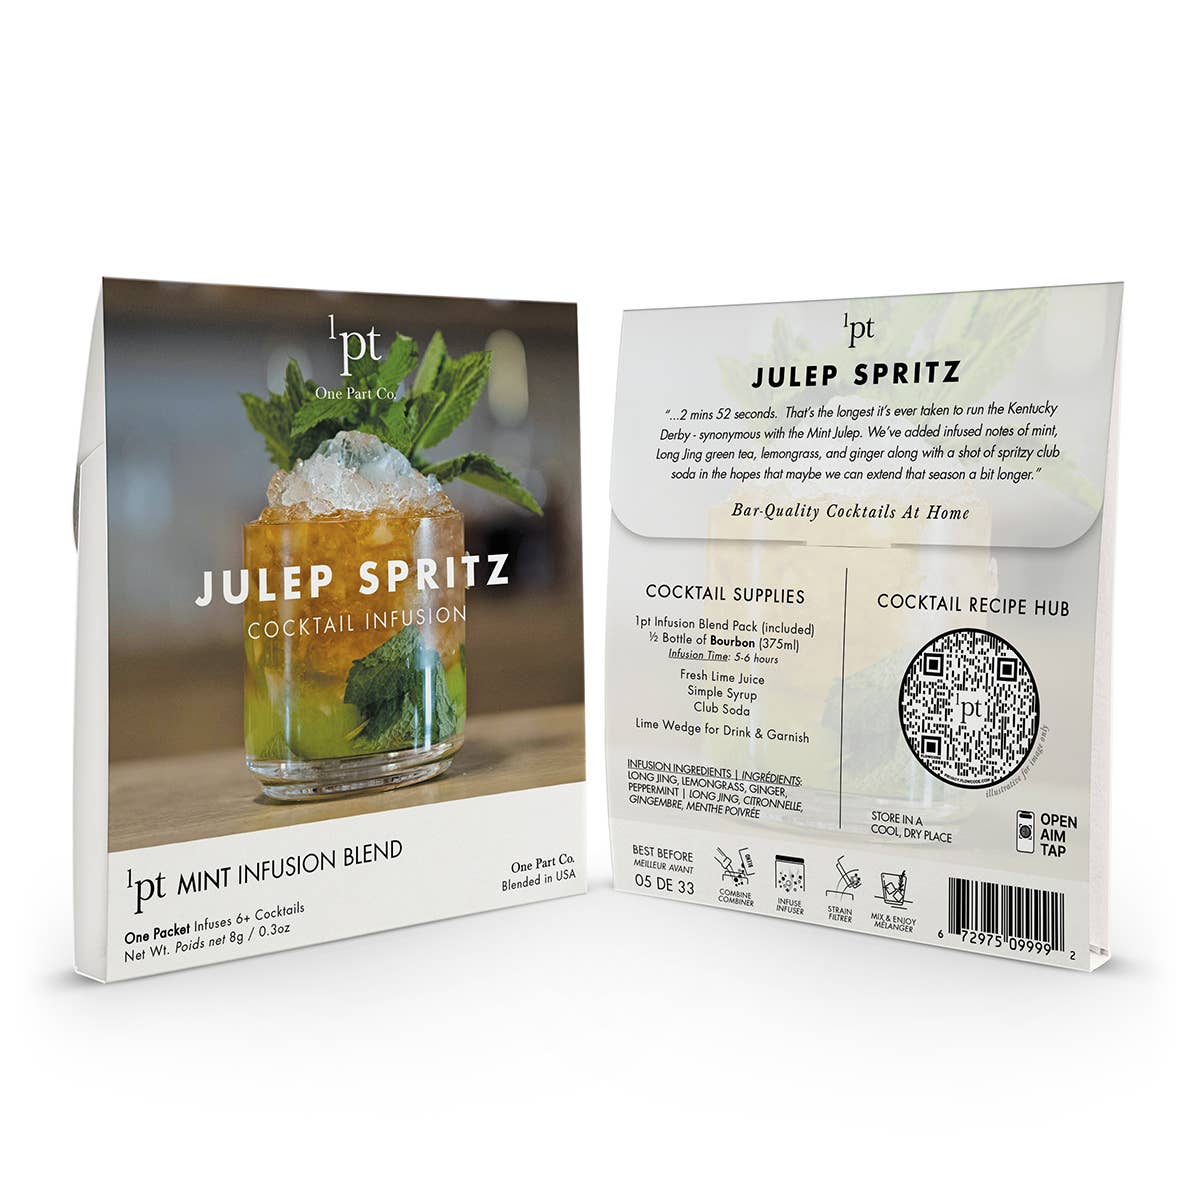 Julep Spritz Cocktail Infusion Kit